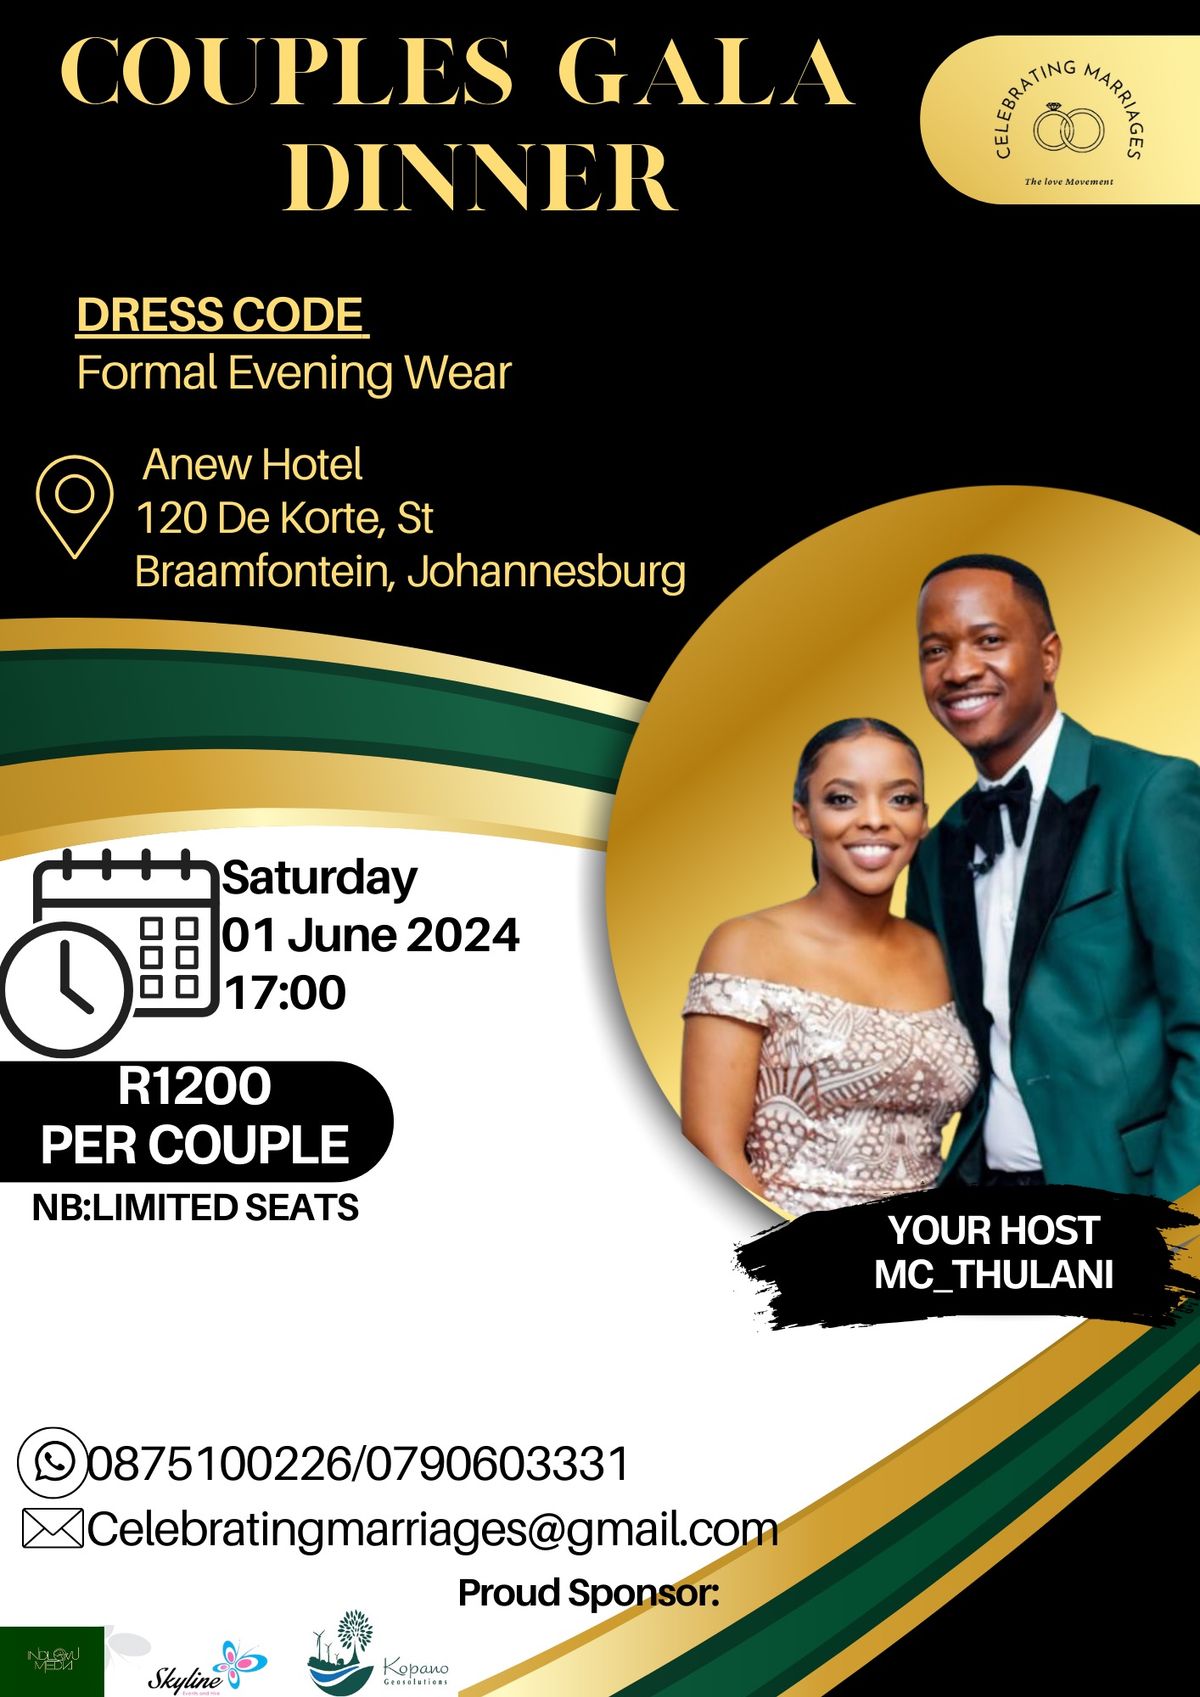 Celebrating Marriages Couples Gala Dinner